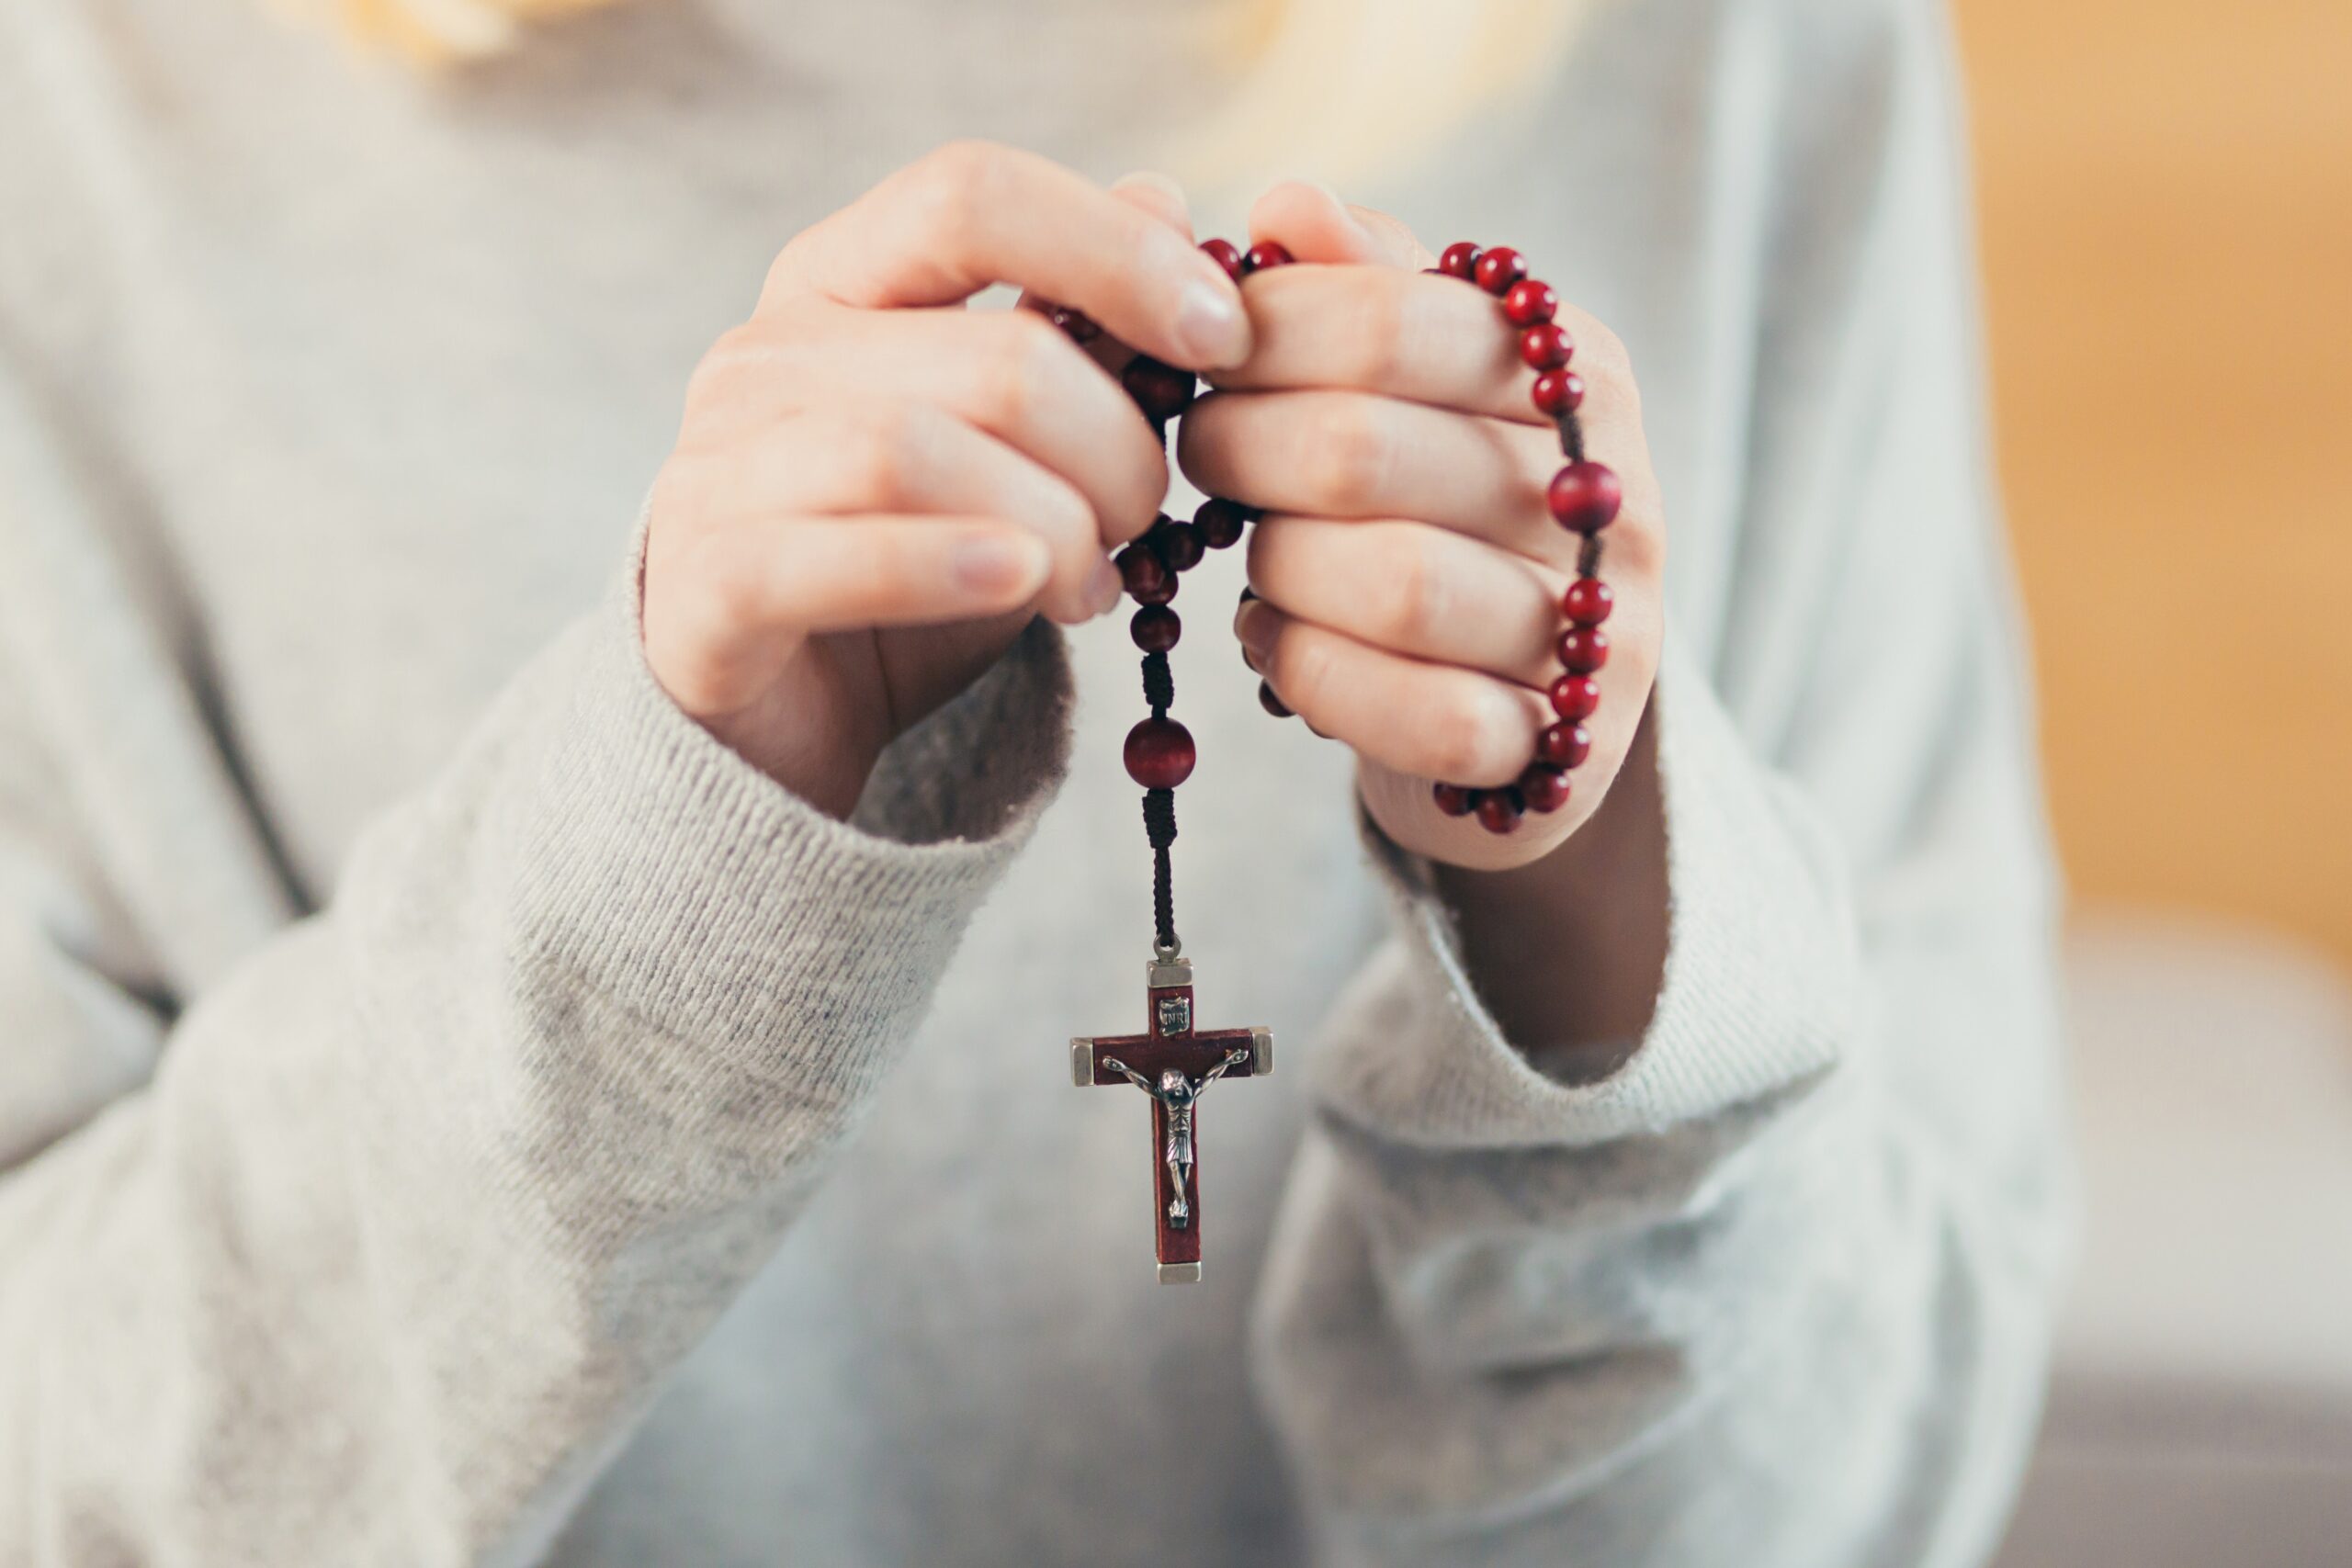 stock photo of woman holding rosary beads